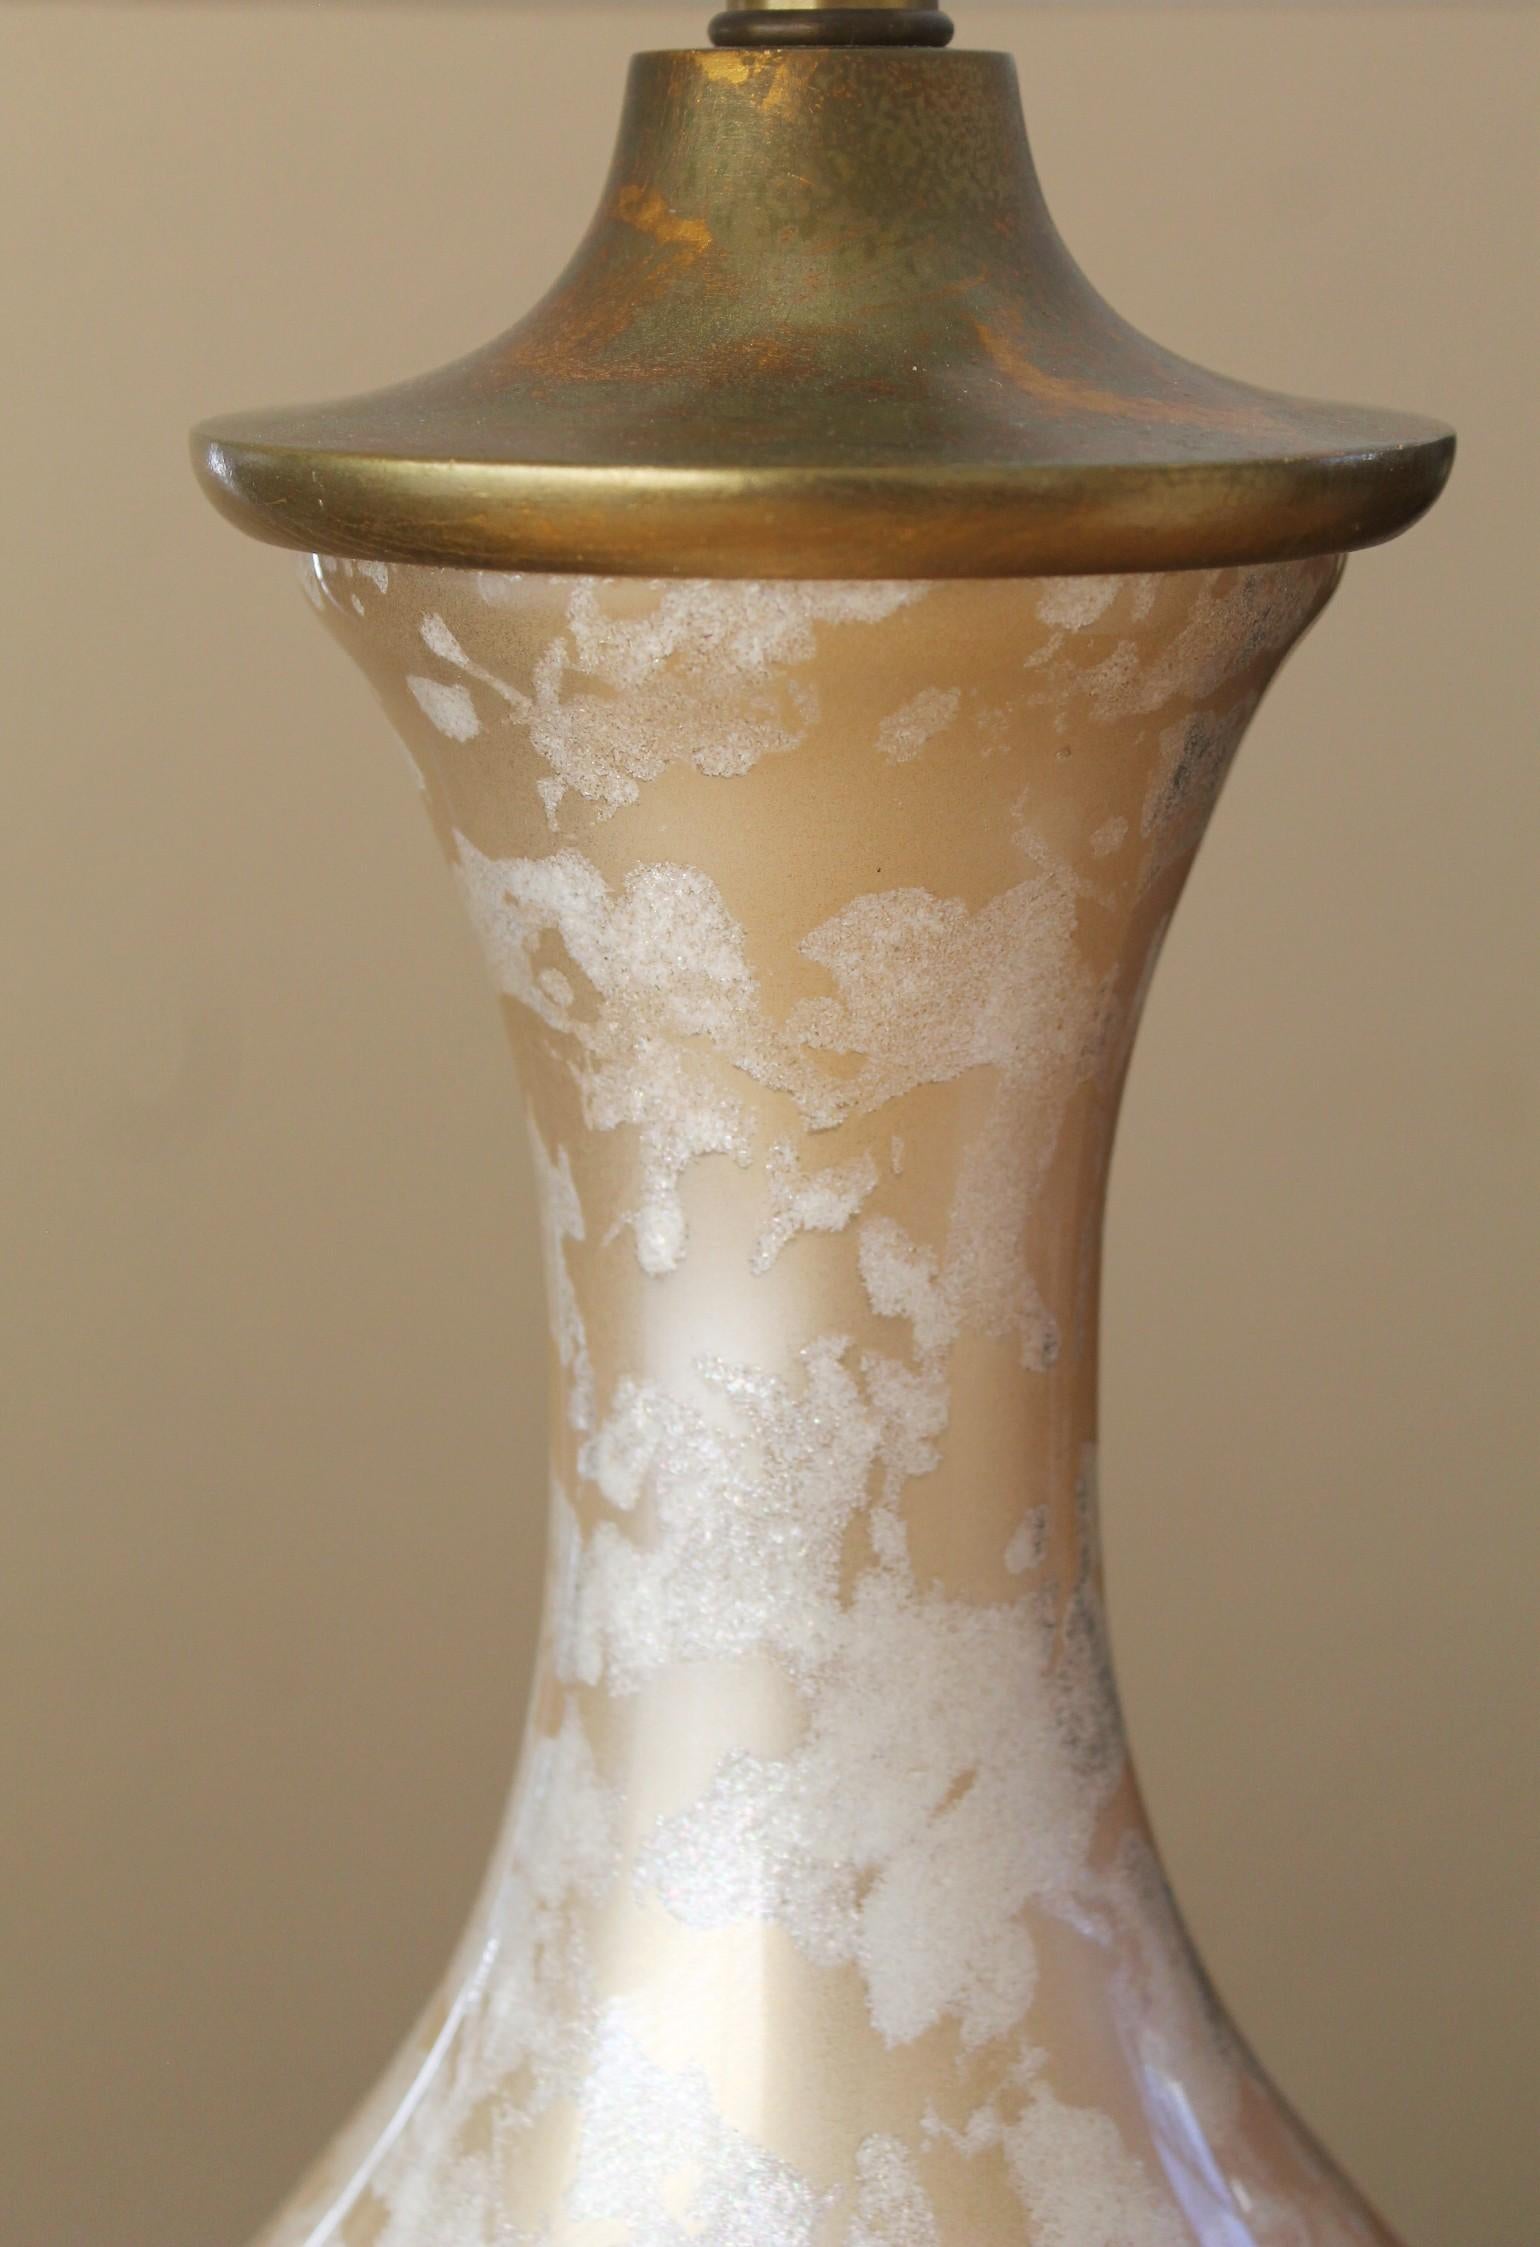 Sublime Murano Glass Mid Century Table Lamp! Italian Decorator Lighting 1950s In Good Condition For Sale In Peoria, AZ